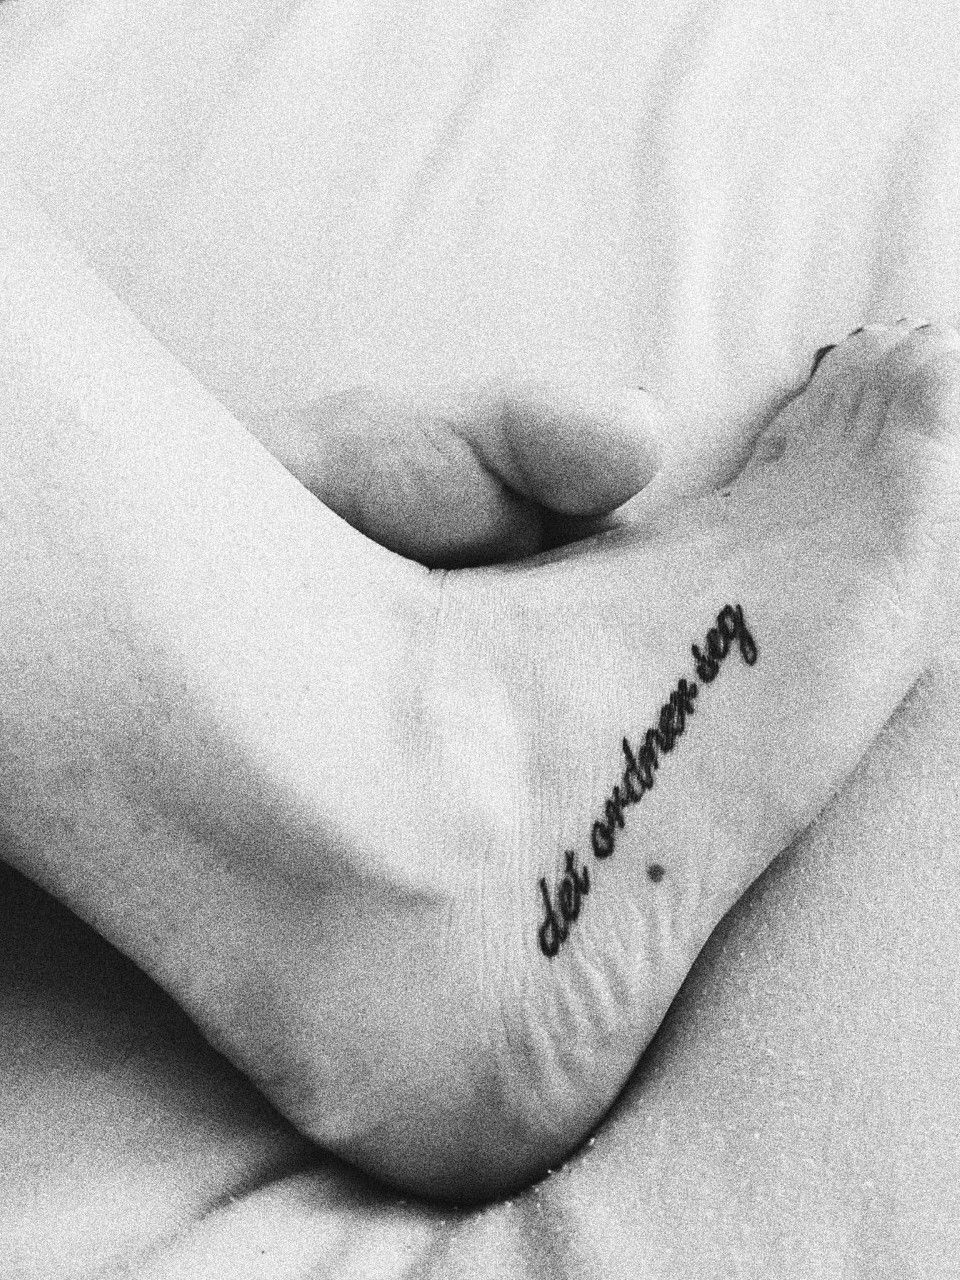 11 Meaningful Tattoos Thatll Remind You To Never Give Up  Keep Moving  Forward In Life